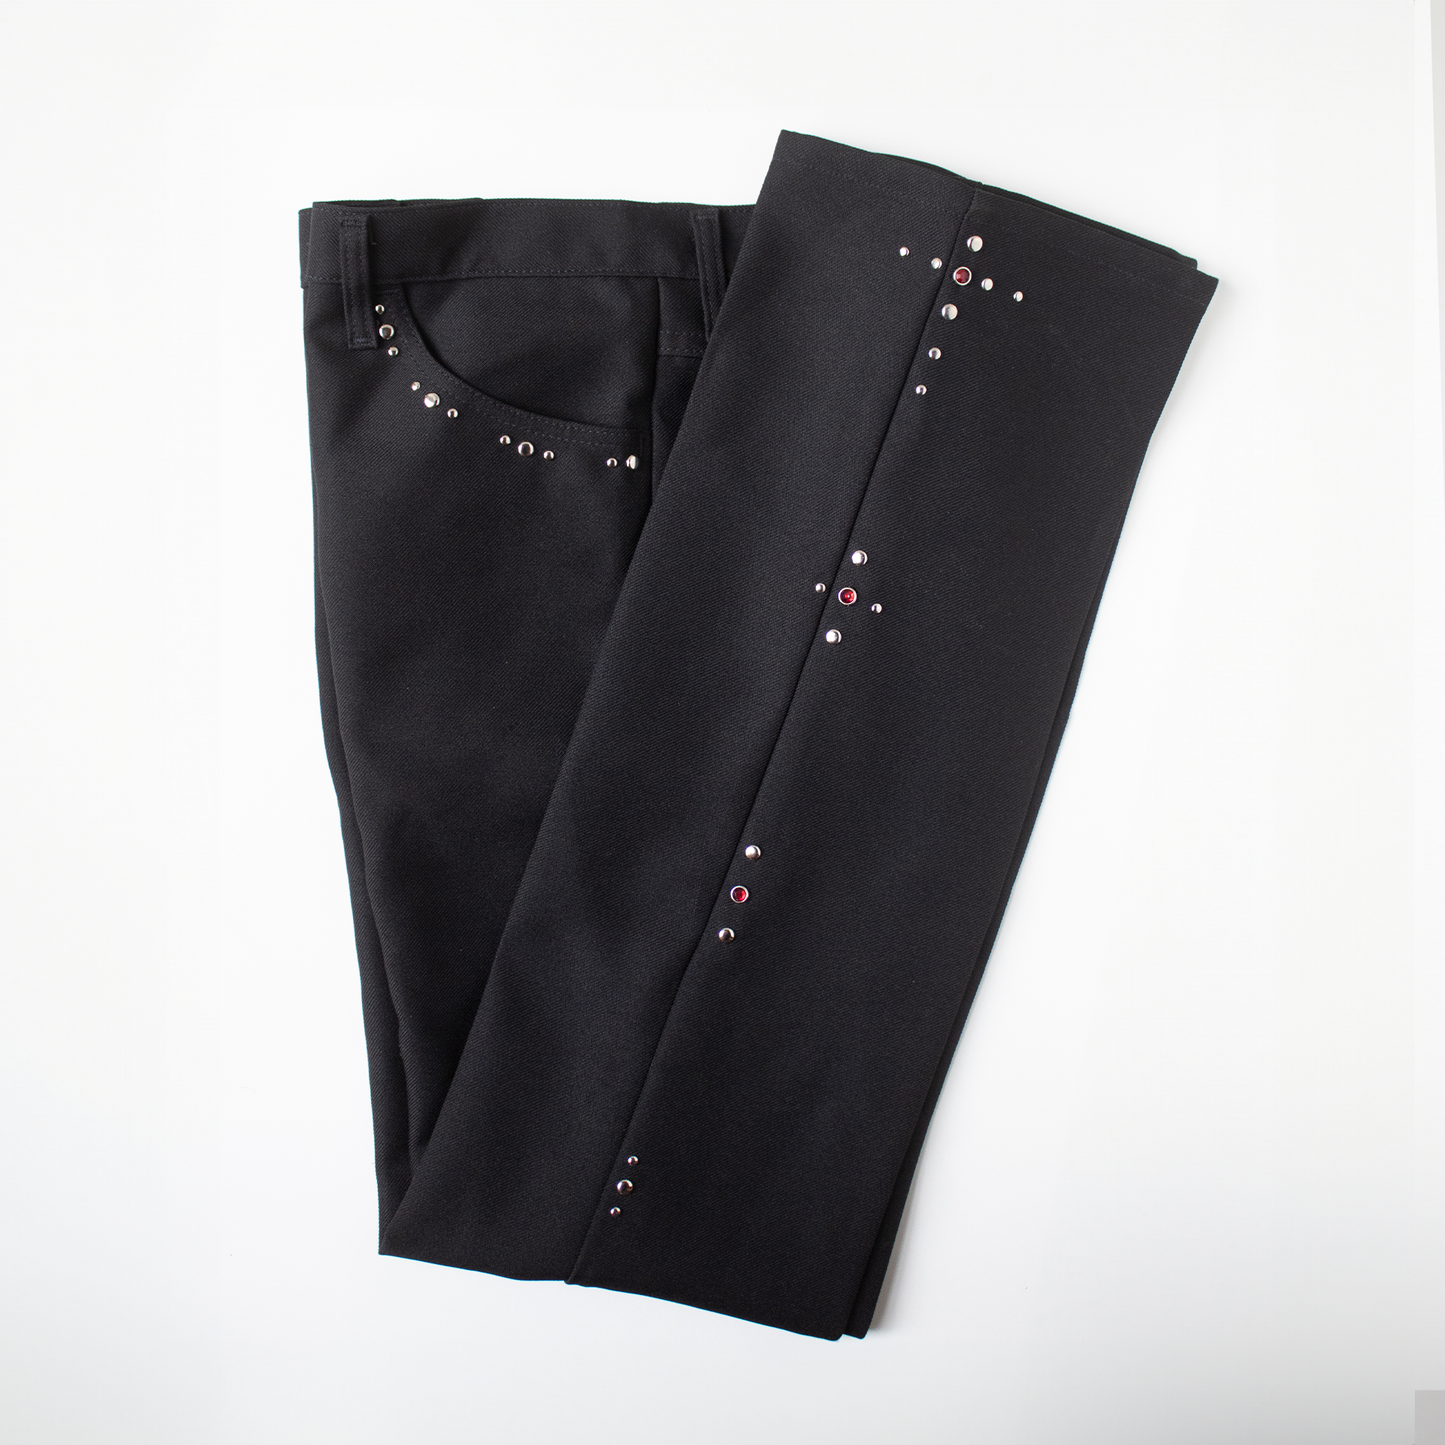 FLAIRS, a studded pant in black